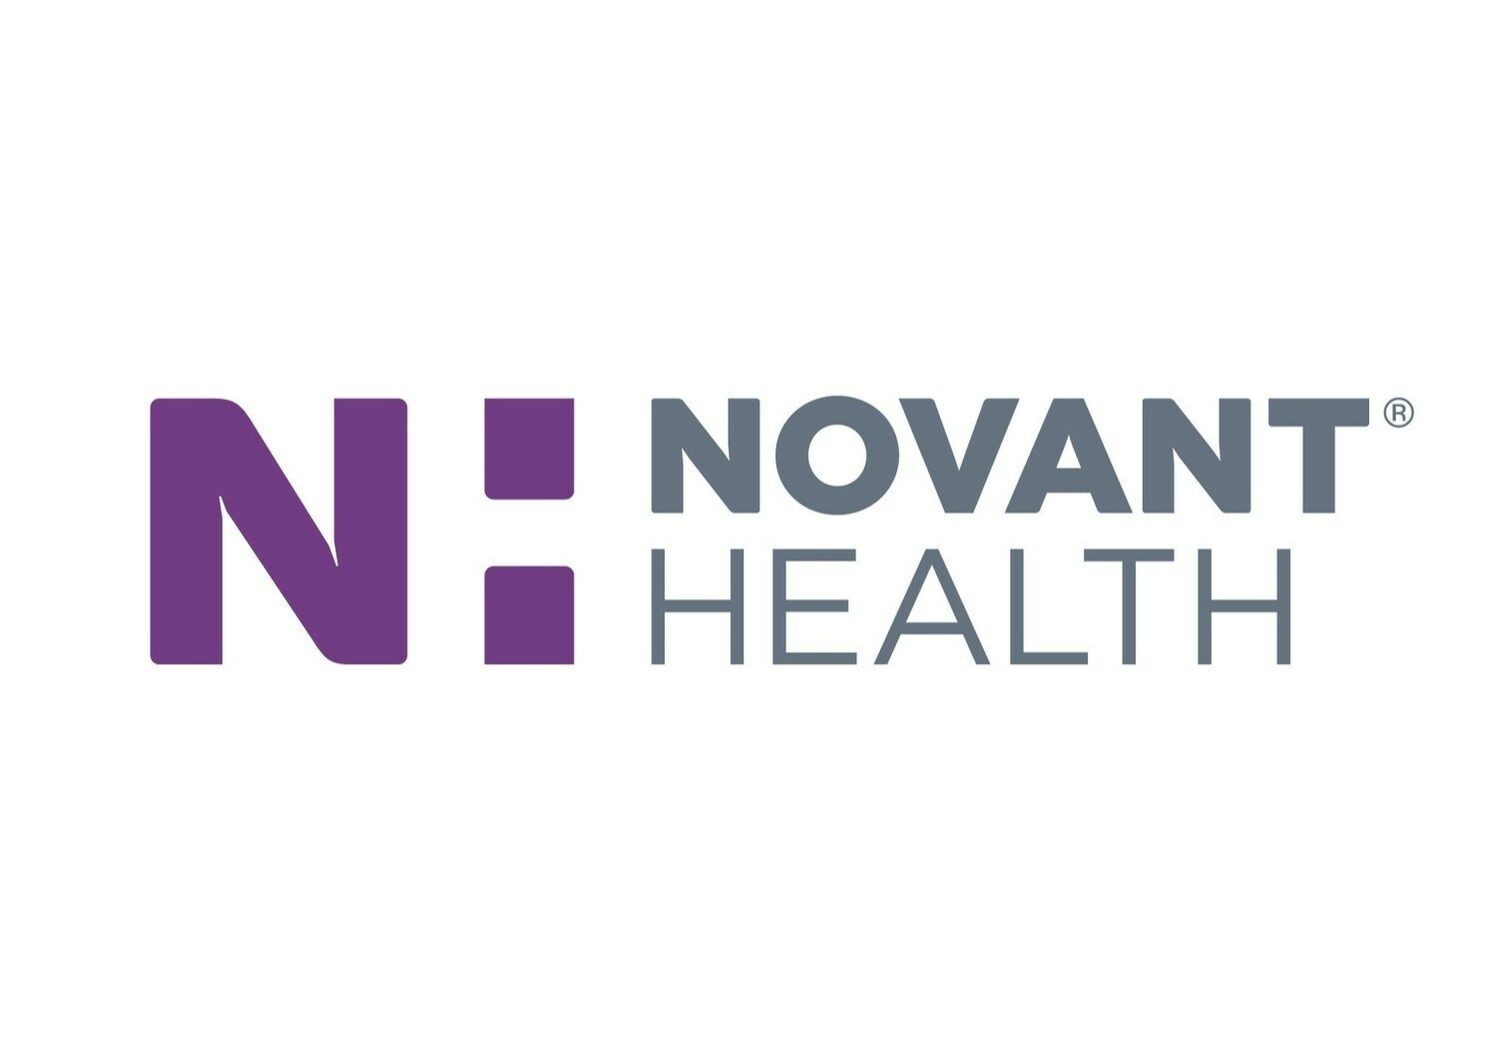 Novant Health to operate retail health clinics located in Walgreens stores in North Carolina; Walgreens to acquire nine Novant Health retail pharmacies